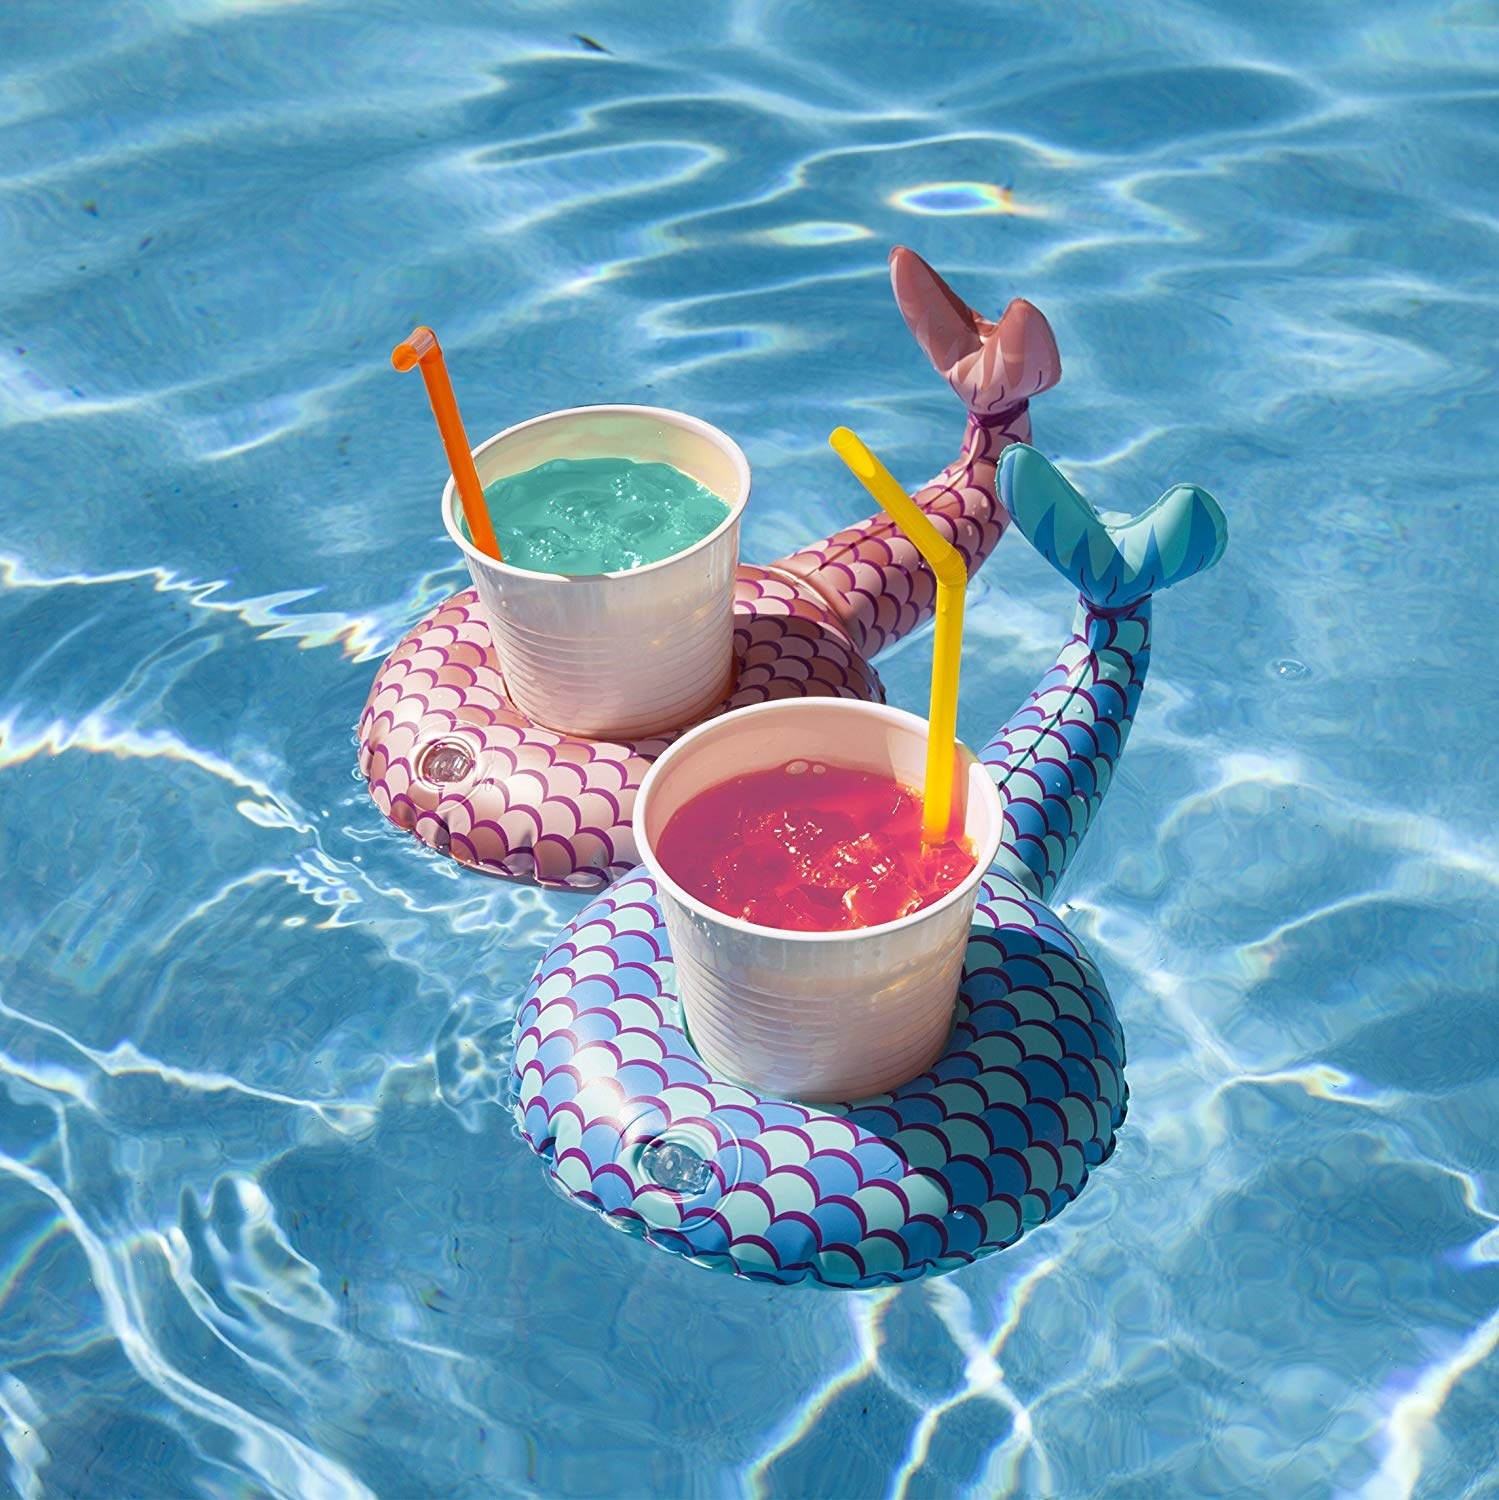 The two drink floats in pink and blue printed with mermaid scales and with tails coming out, floating in a pool holding drinks